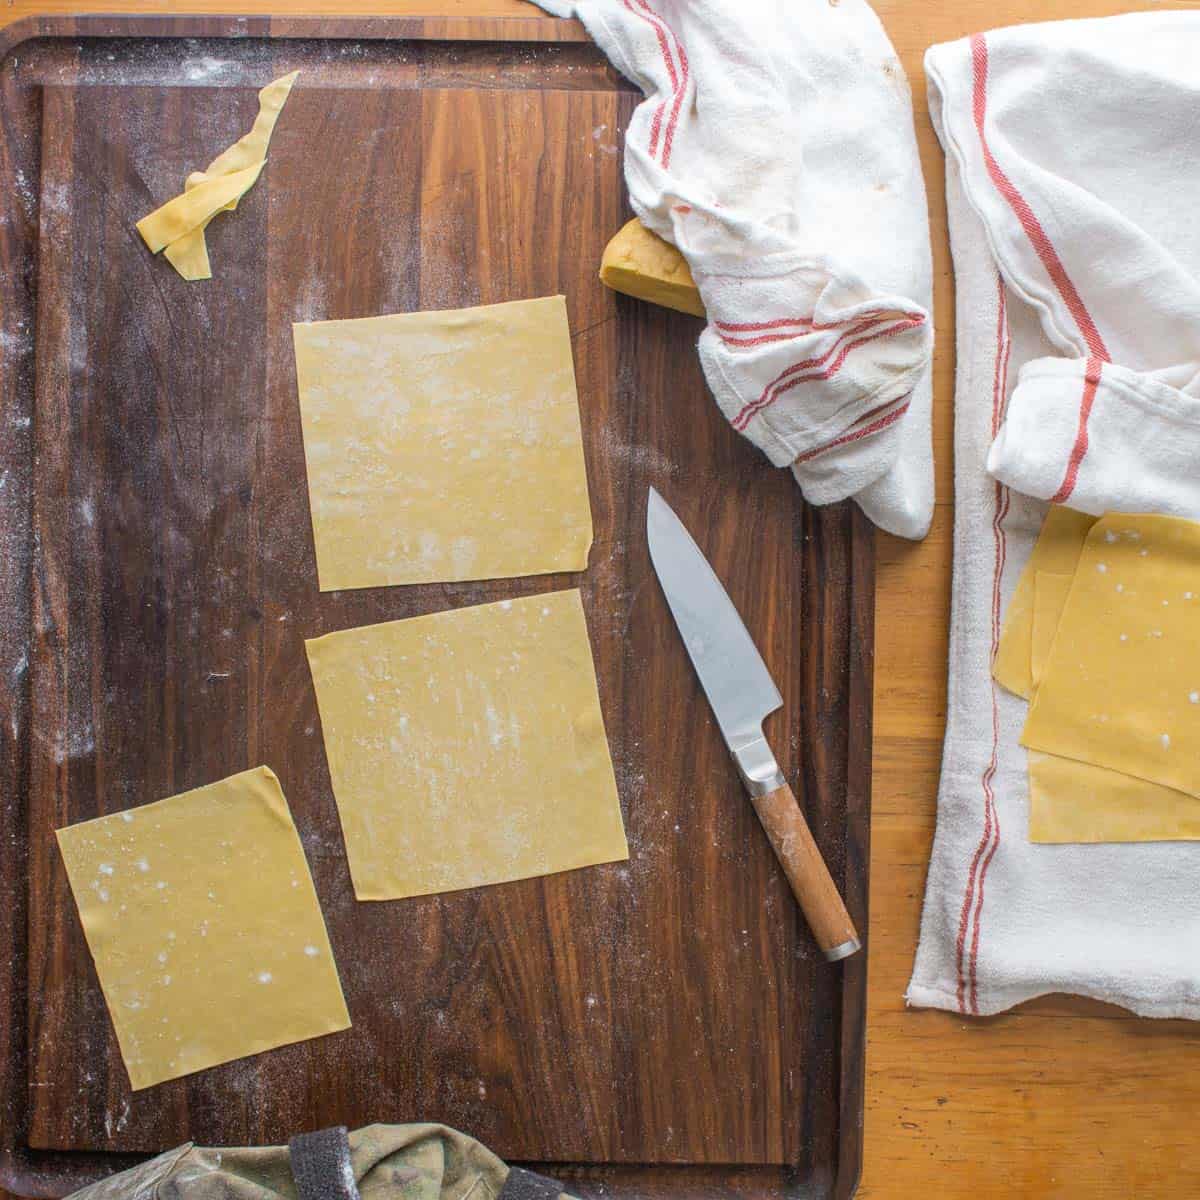 cutting pasta sheets into squares